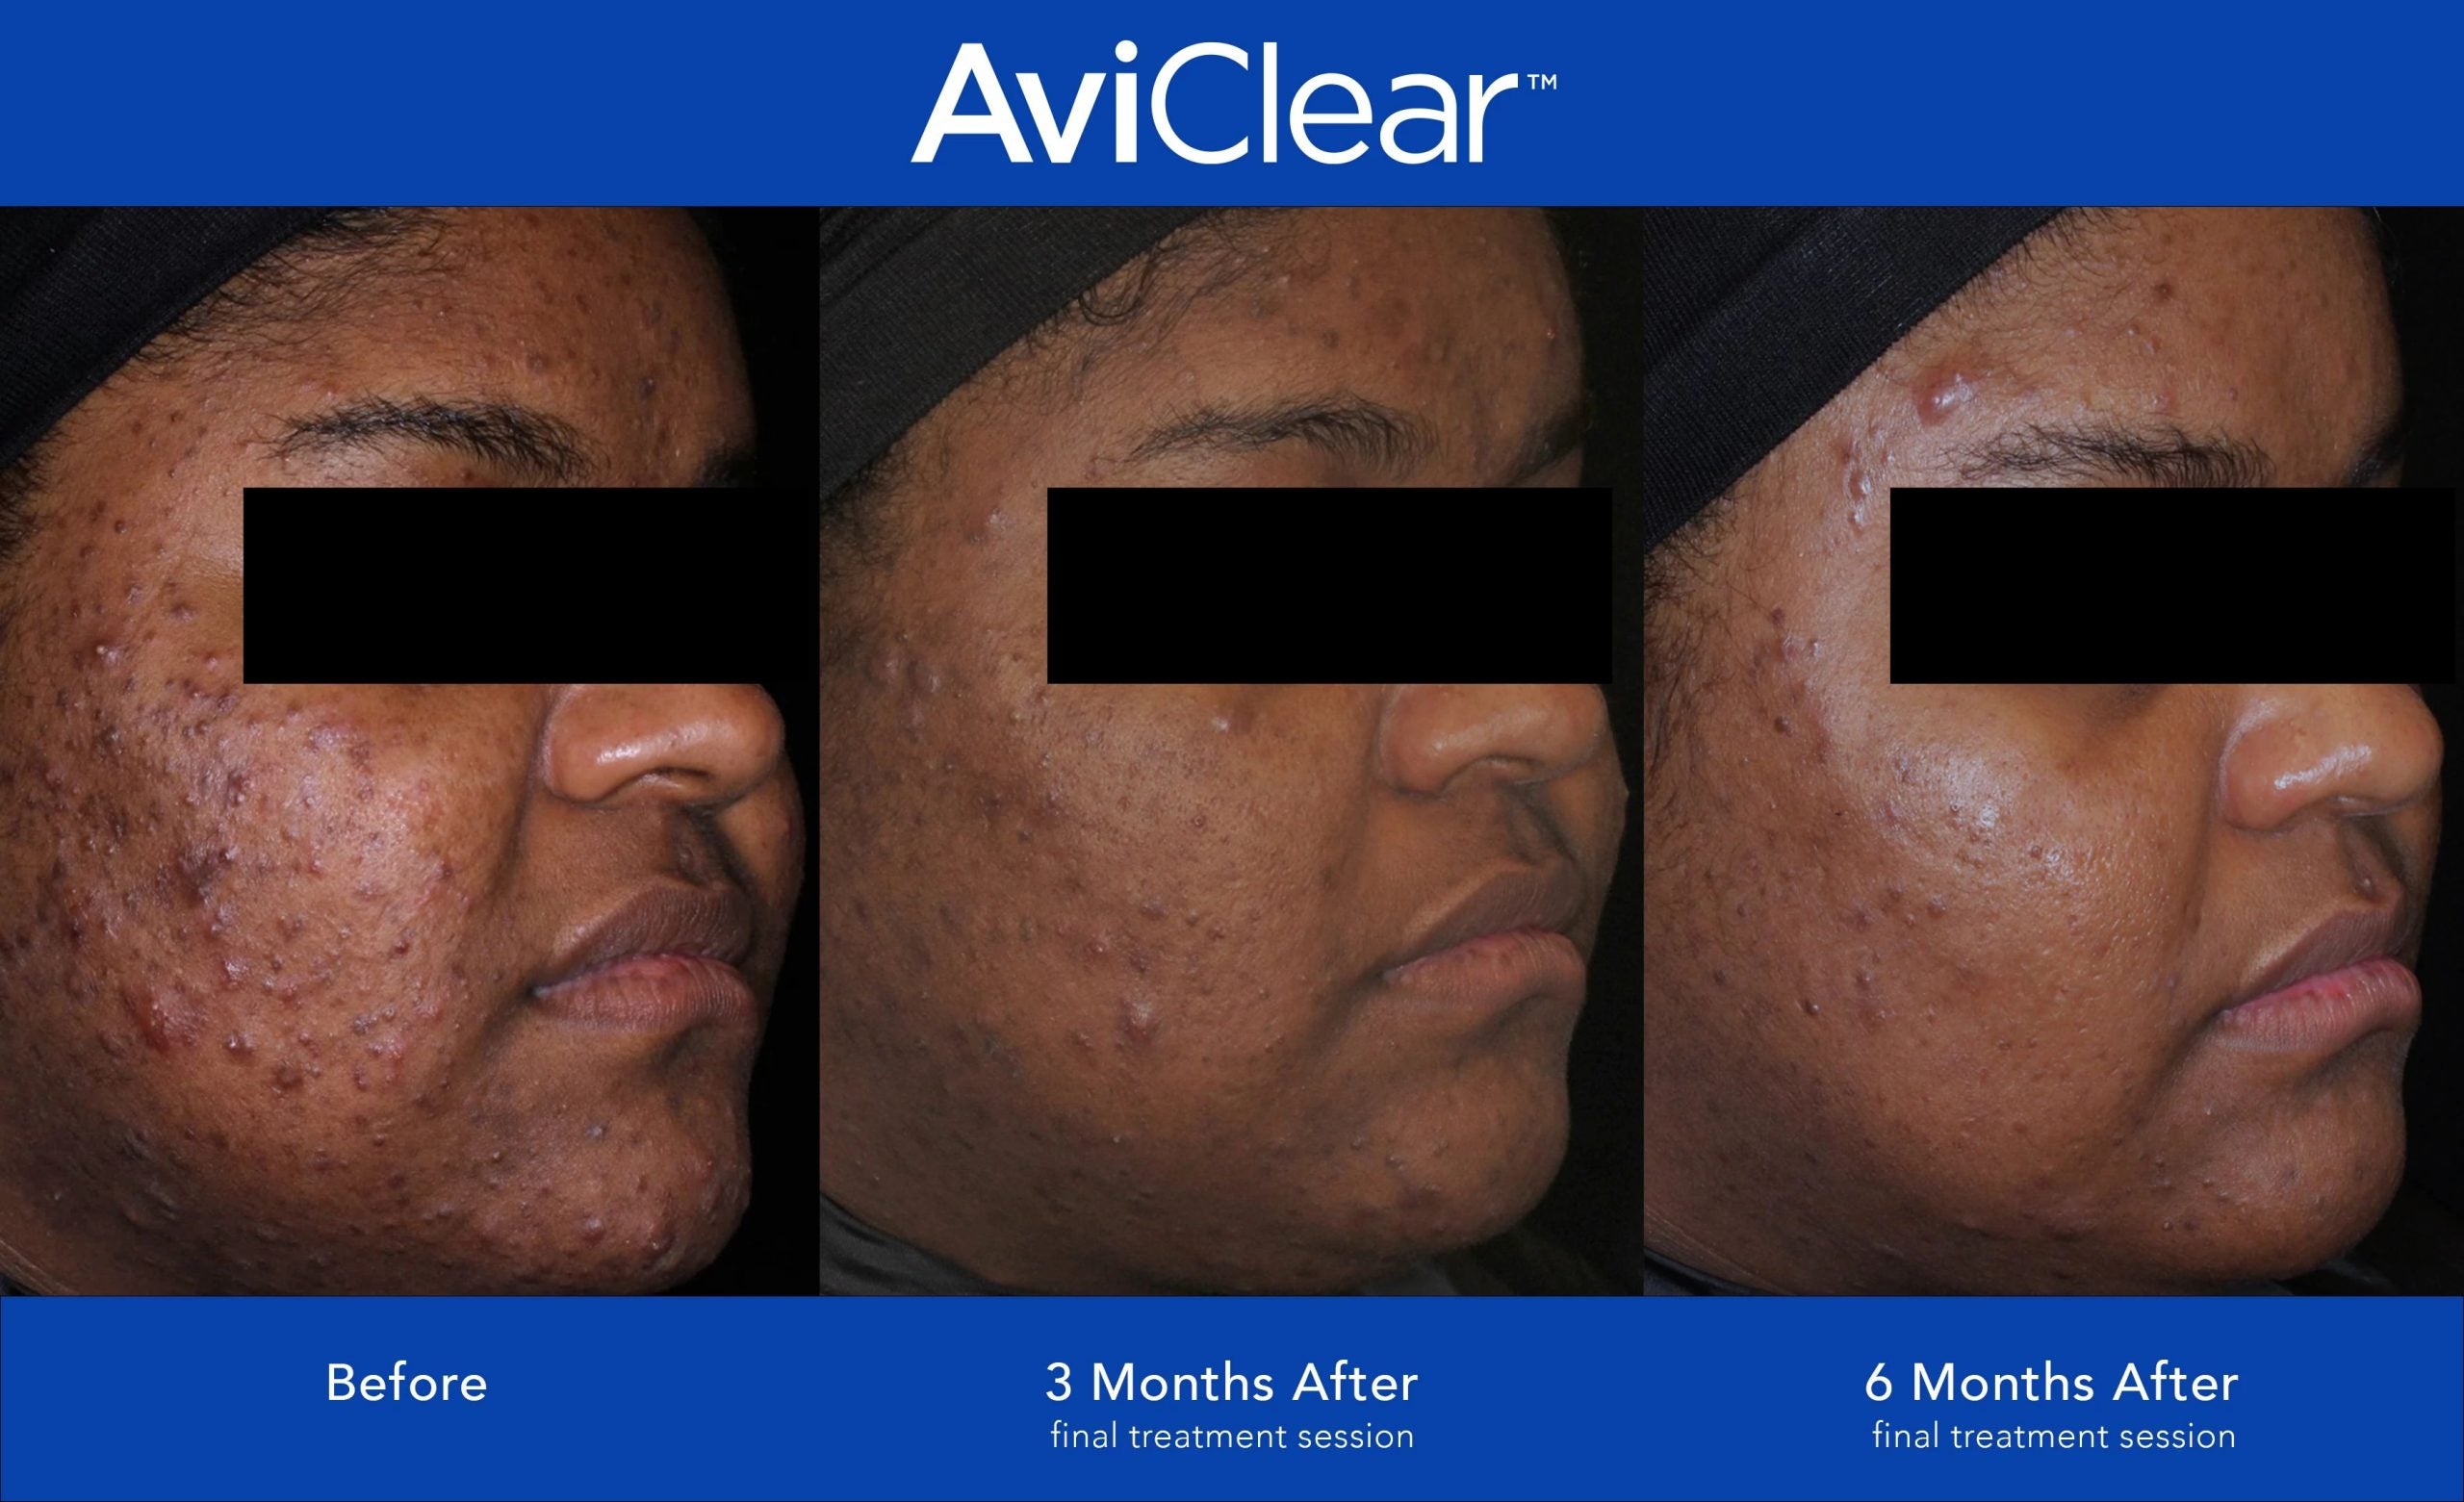 I tried AviClear – A laser treatment for long term acne